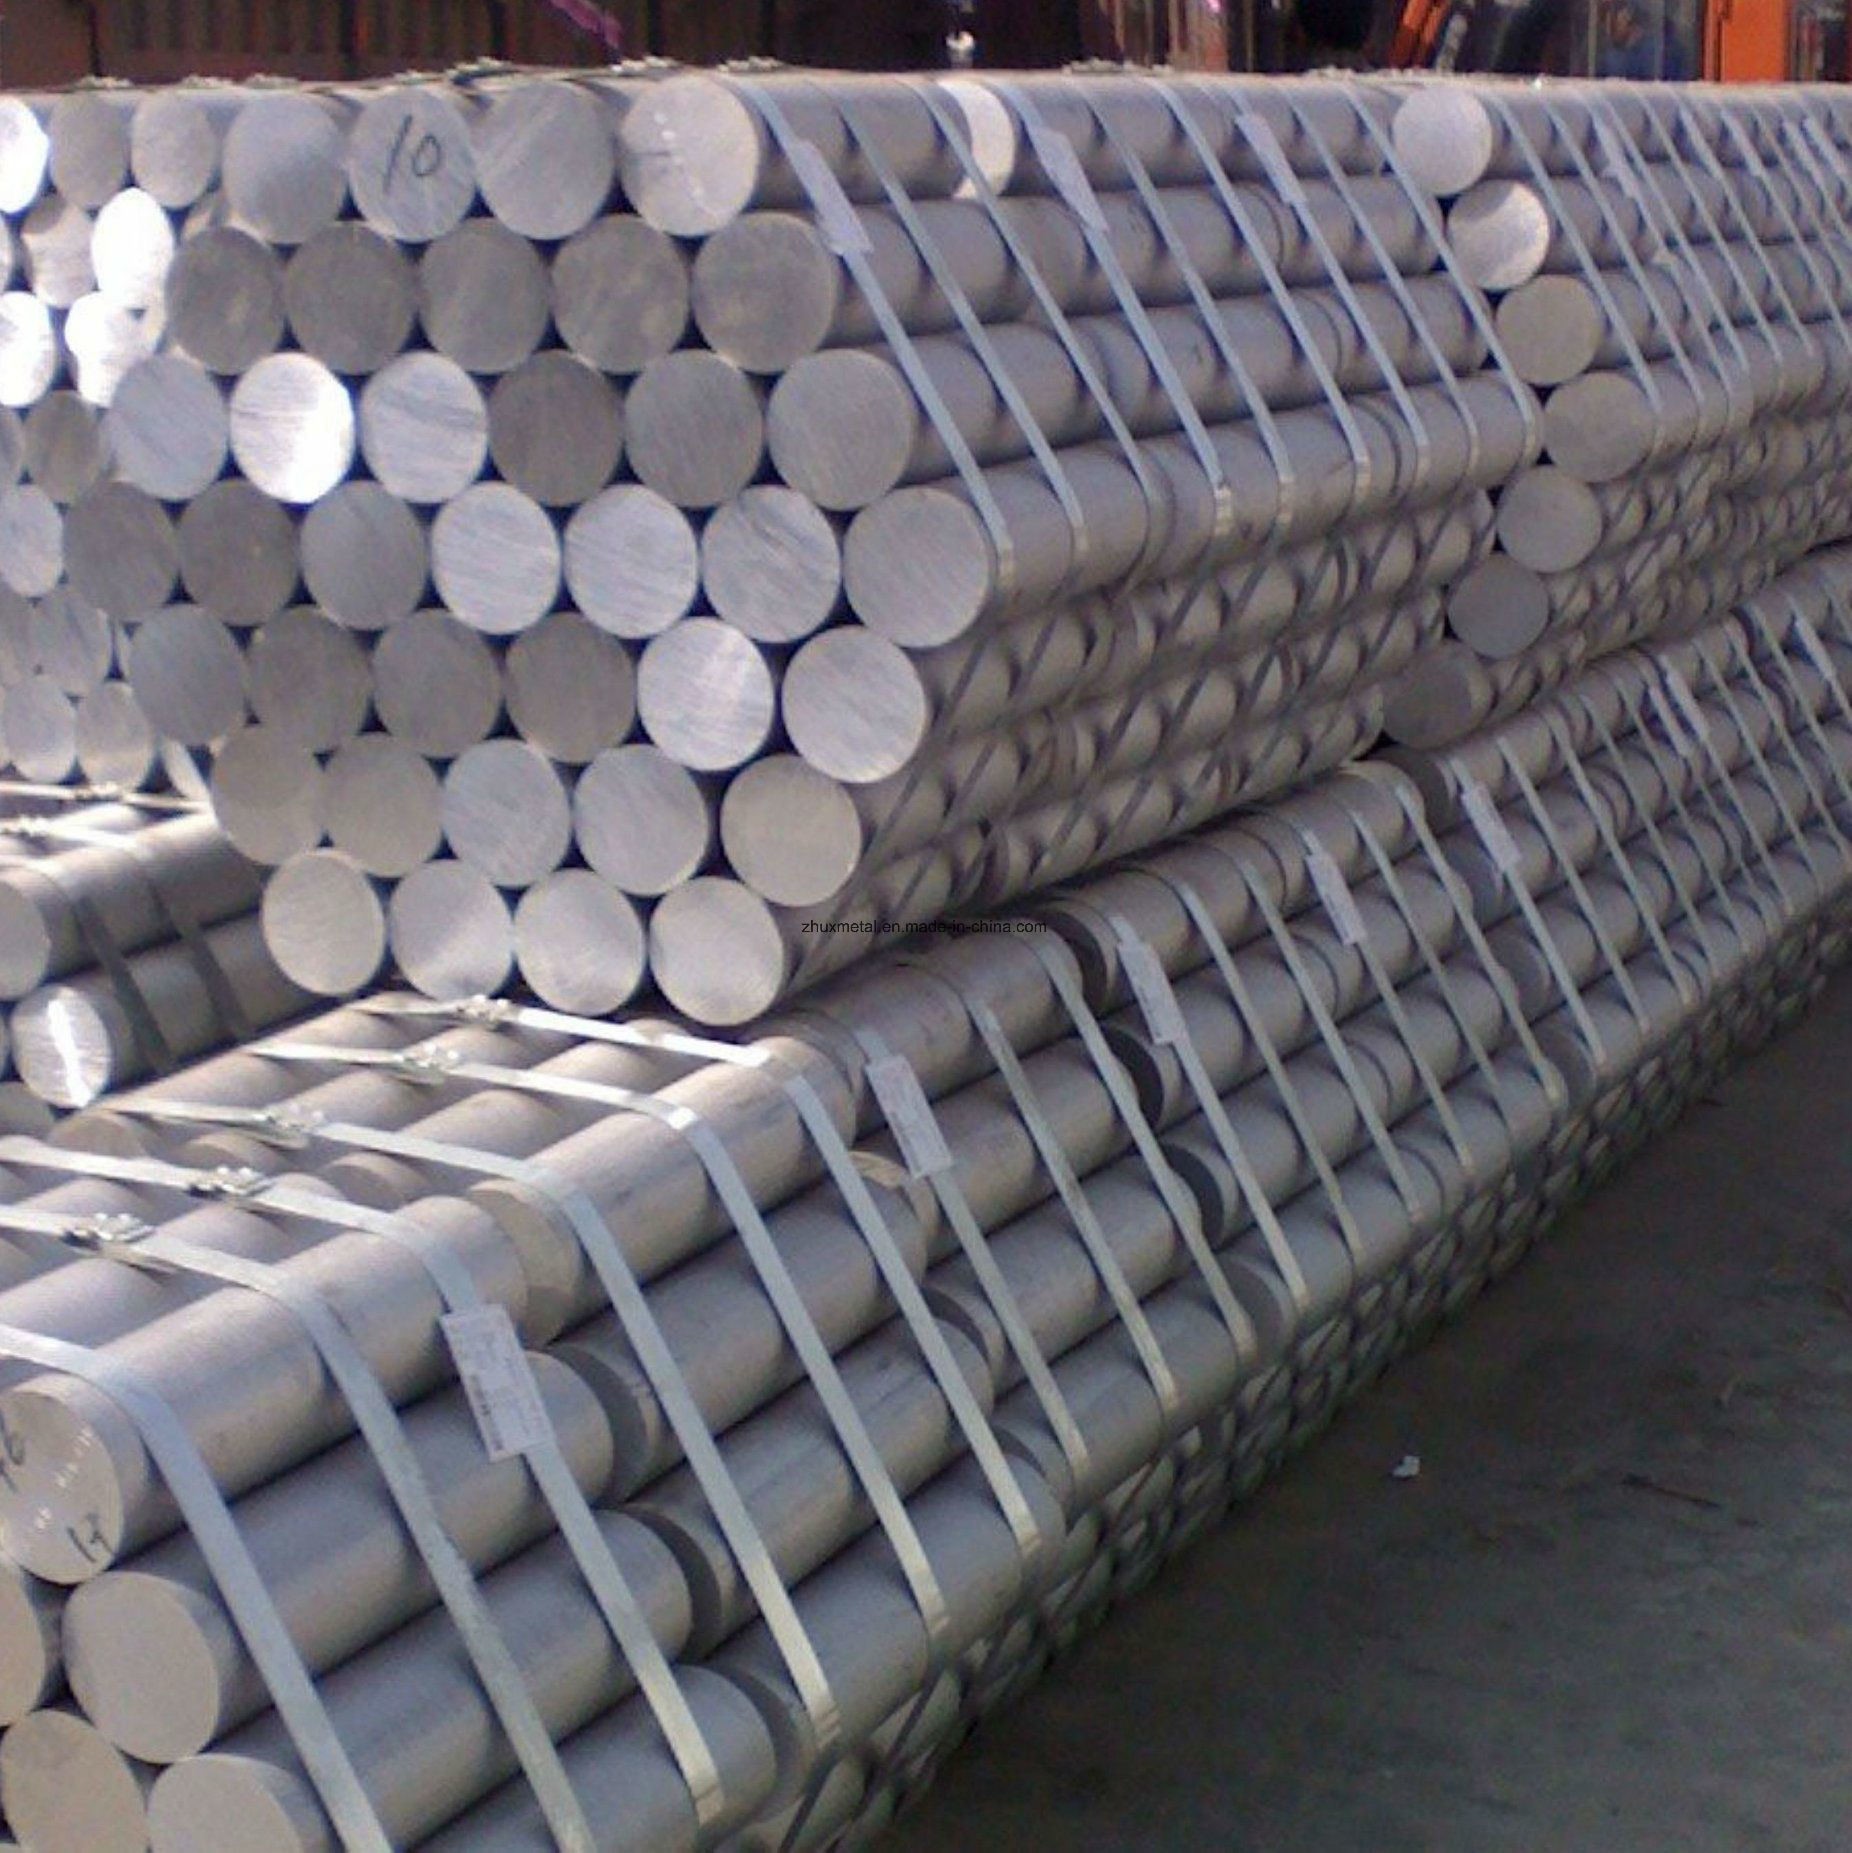 China’s Feb'24 aluminium output falls by 6.4% M-o-M on reduced production at downstream processing plants